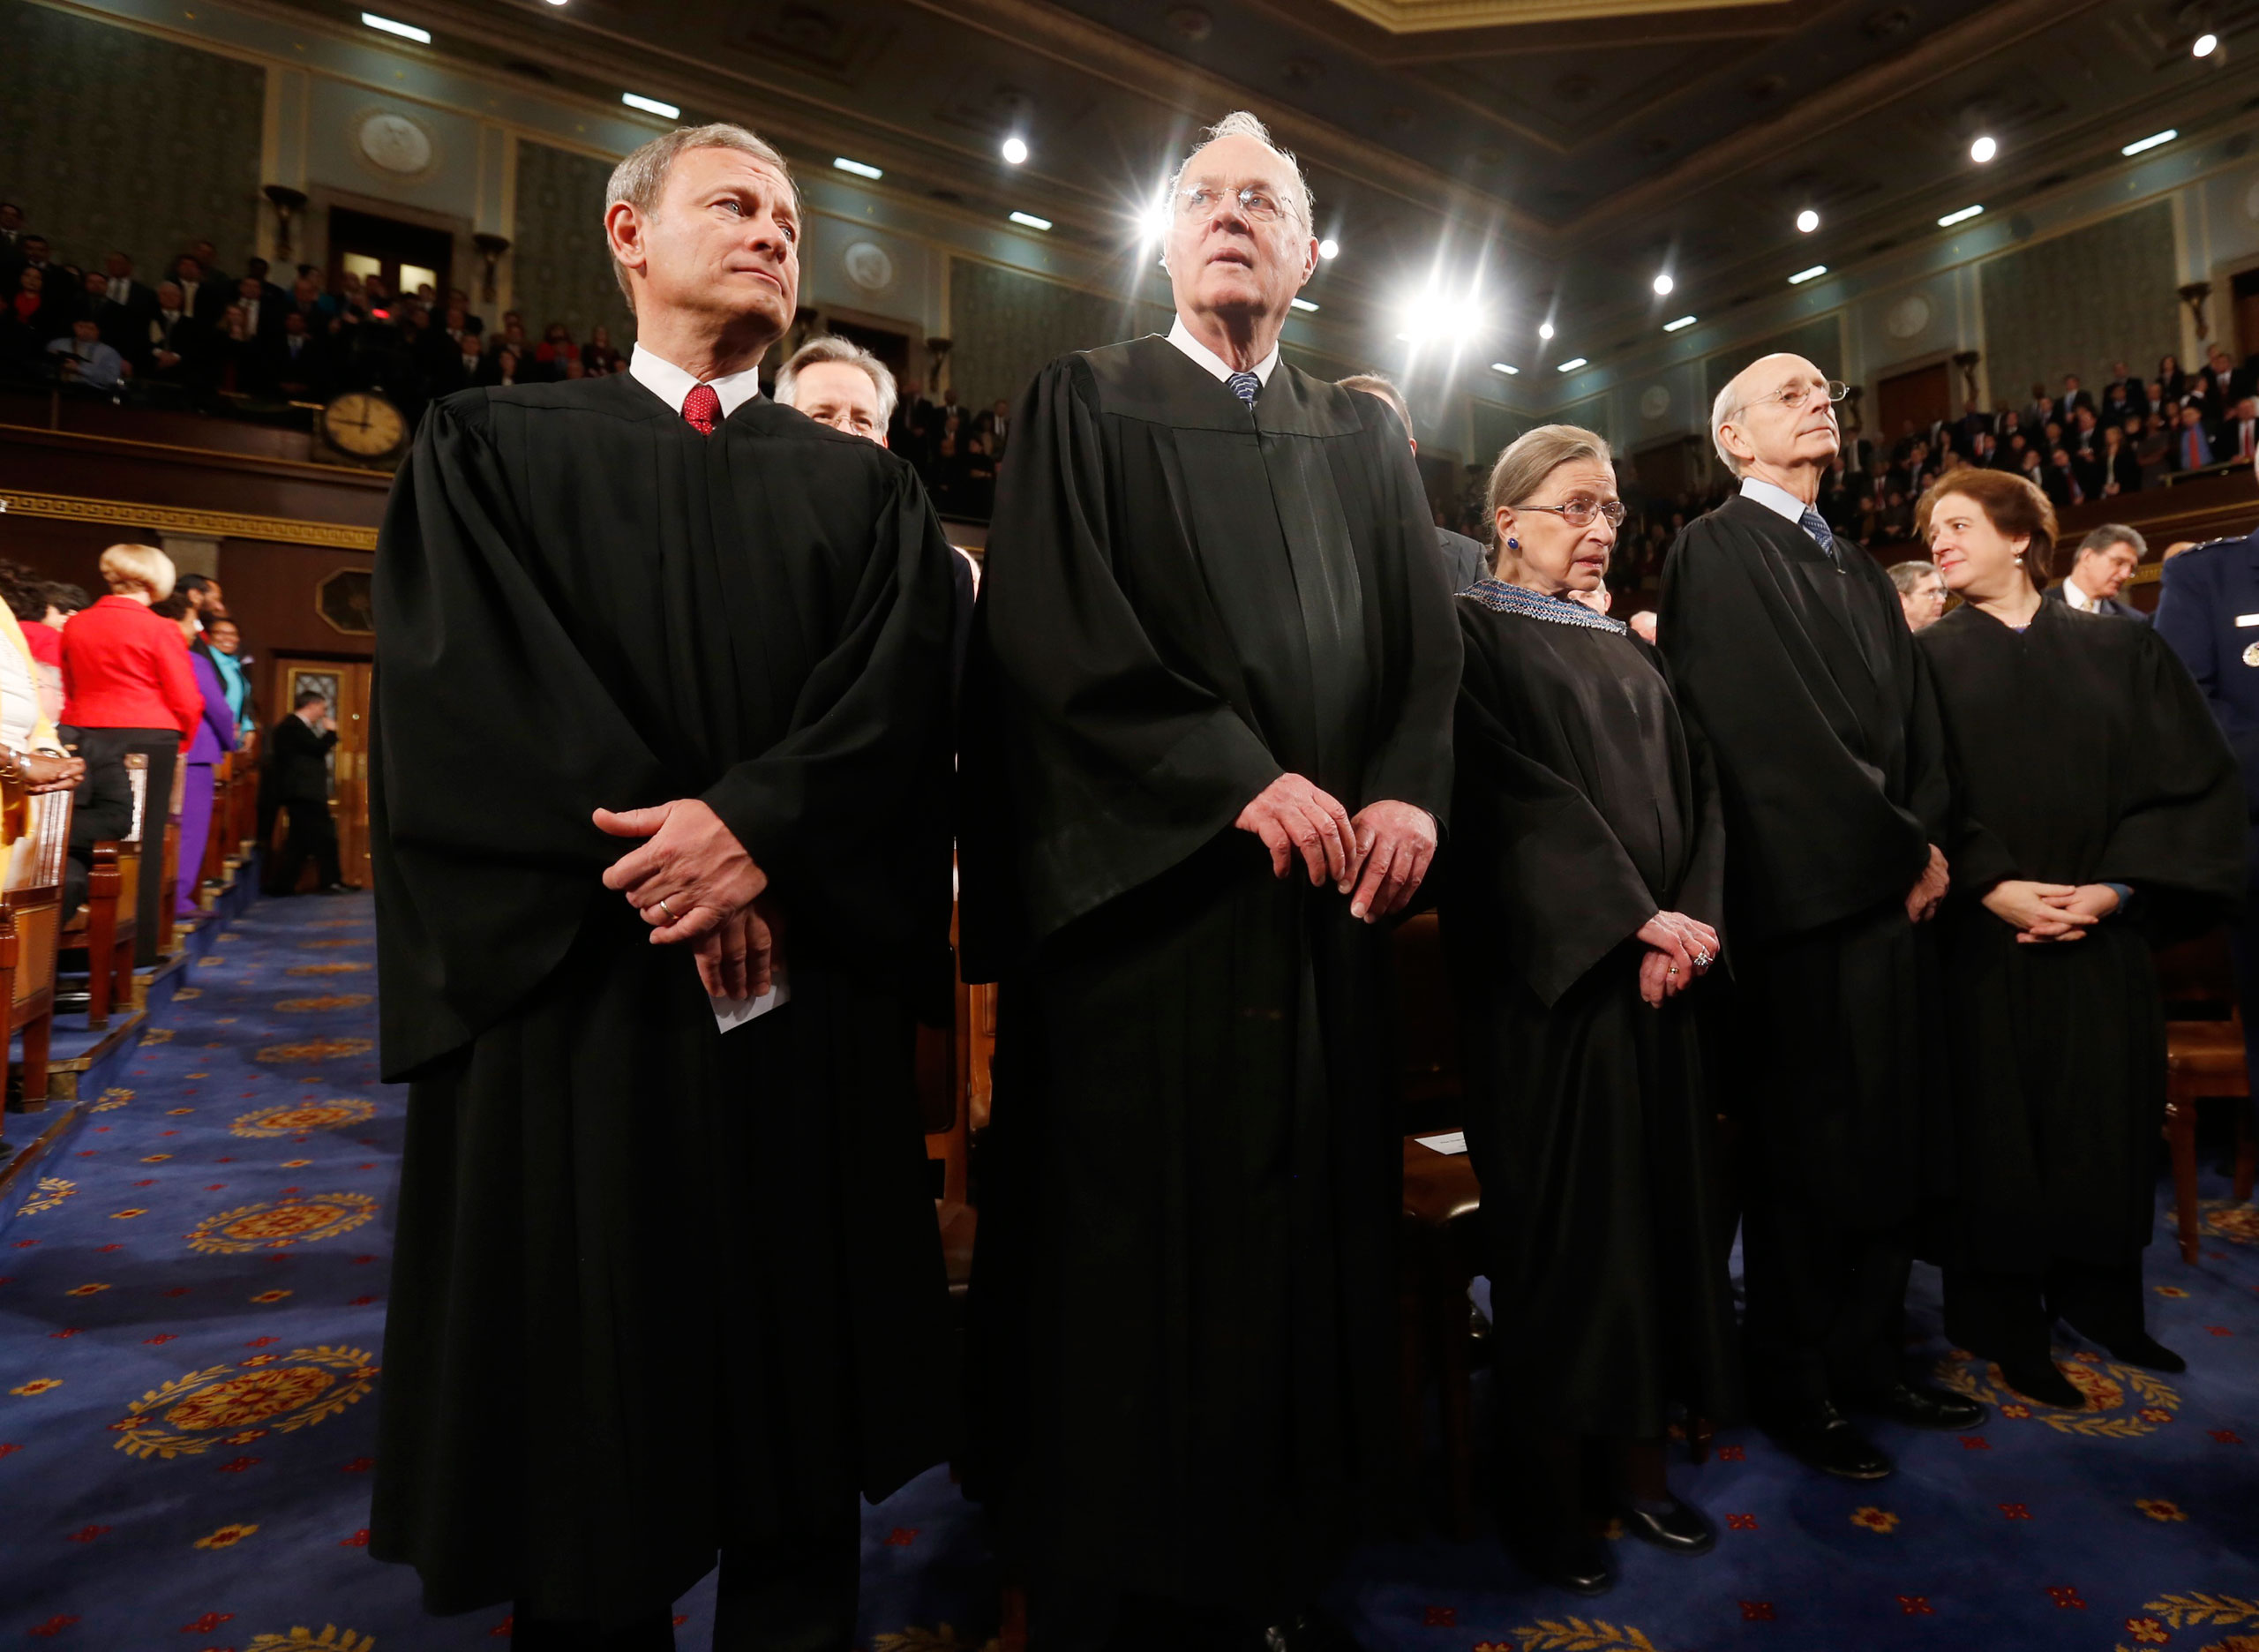 From left: U.S. Supreme Court Chief Justice John Roberts stands with fellow Justices Anthony Kennedy, Ruth Bader Ginsburg, Stephen Breyer and Elena Kagan prior to President Barack Obama's State of the Union speech on Capitol Hill in Washington, D.C. on  Jan. 28, 2014. (Larry Downing—Reuters)